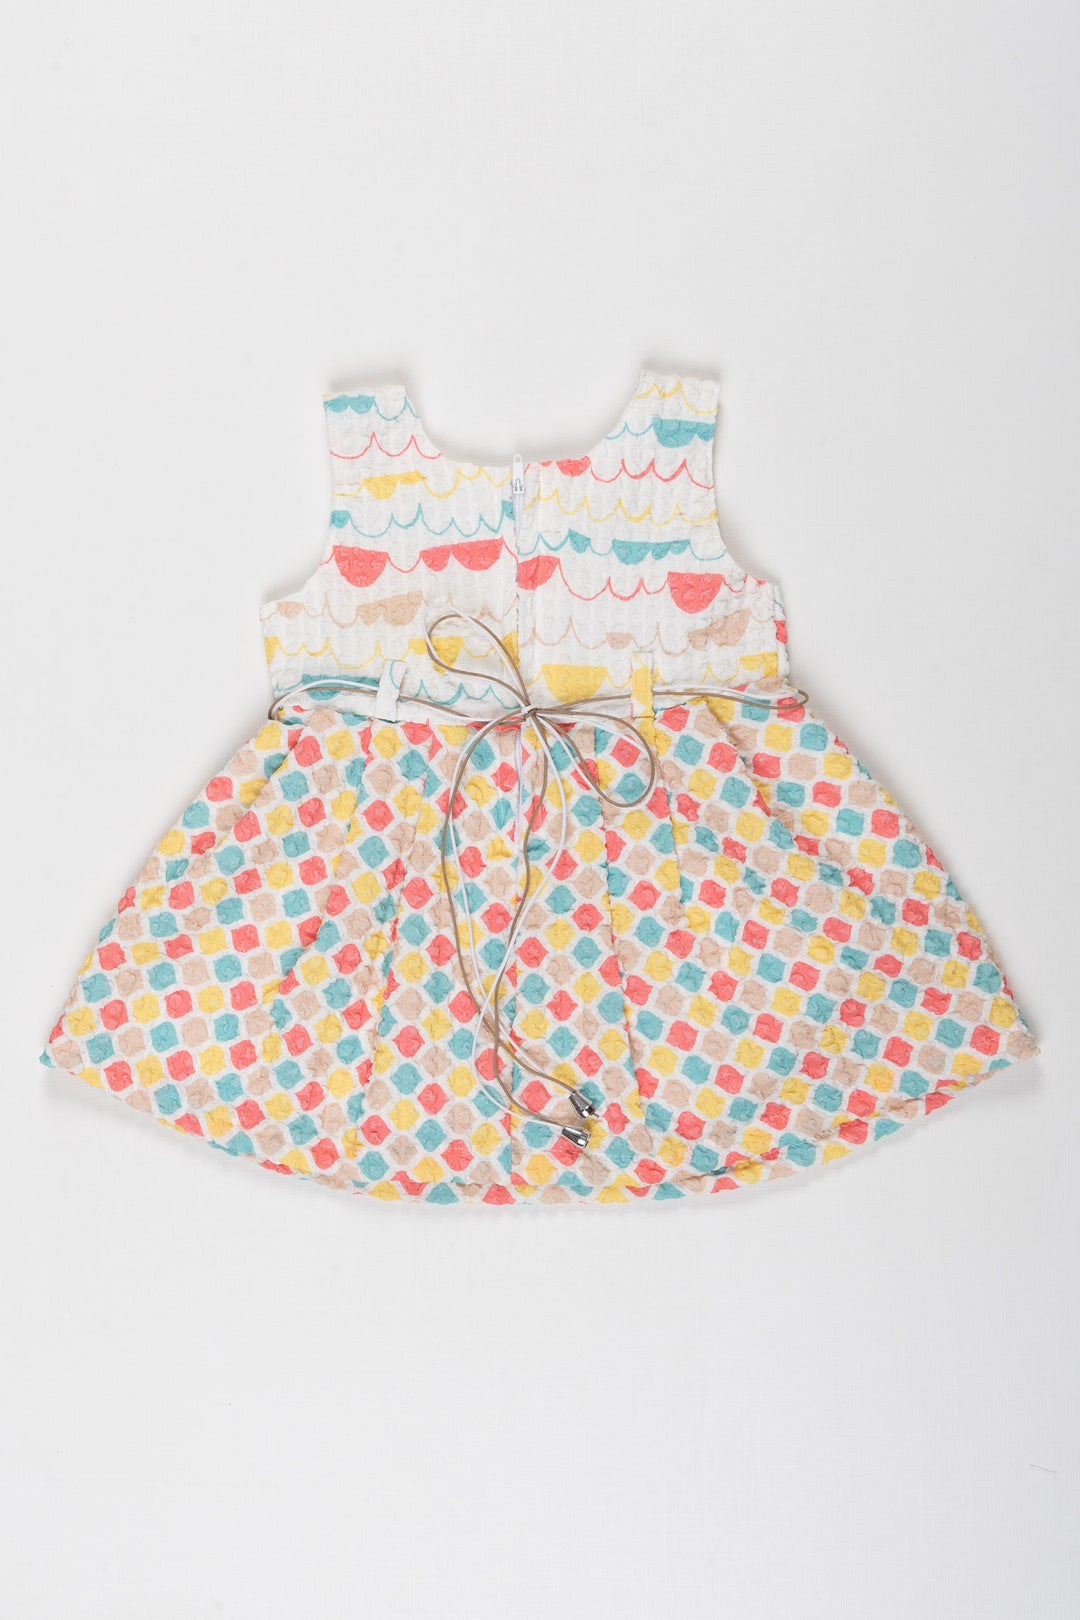 The Nesavu Baby Fancy Frock Infant Party Perfection: Colorful Geometric Sleeveless Frock for Baby Girls Nesavu Charming Sleeveless Geometric Frock for Infants | Perfect for Summer | The Nesavu